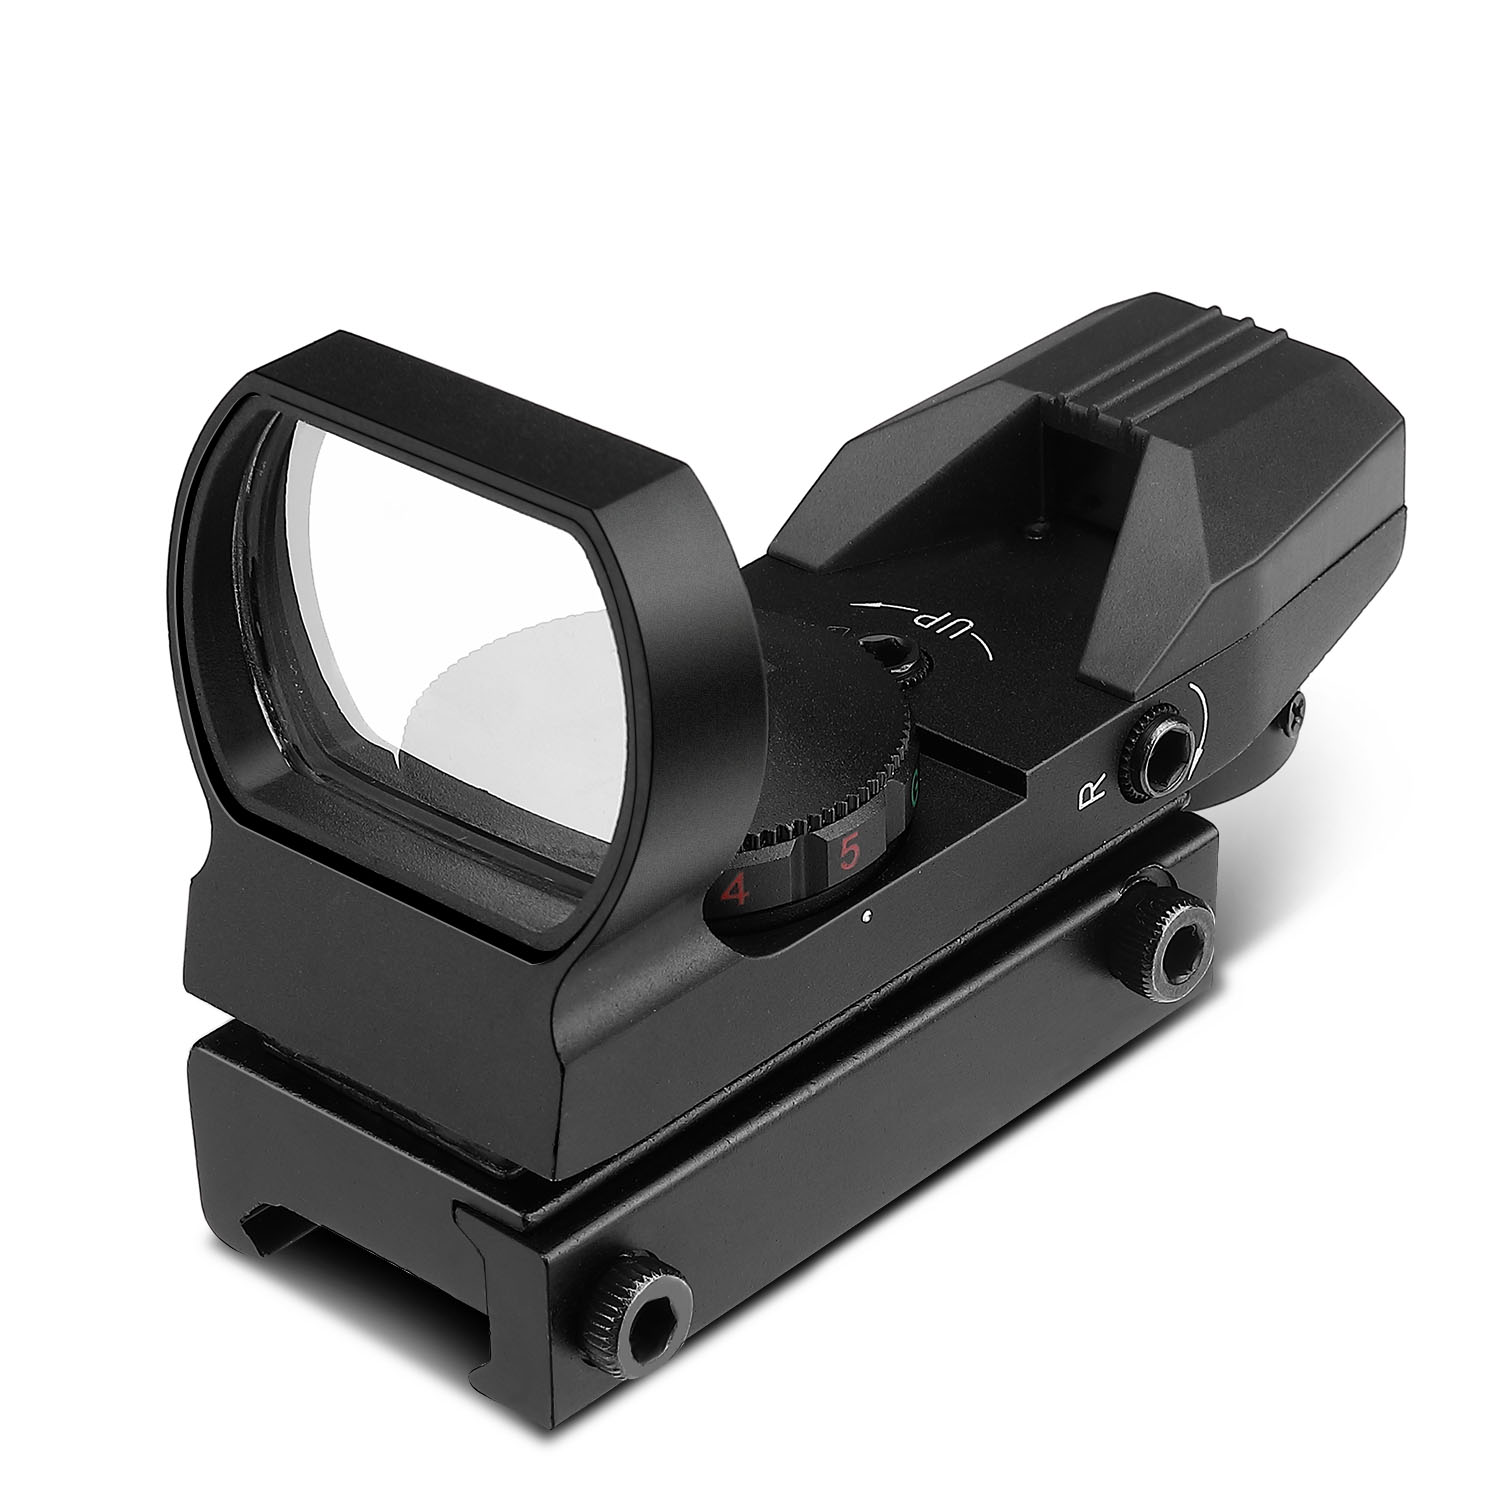 Holographic Four Modes Reflex Red Green Dot Sight Scope Picatinny Rail W/Wrench 